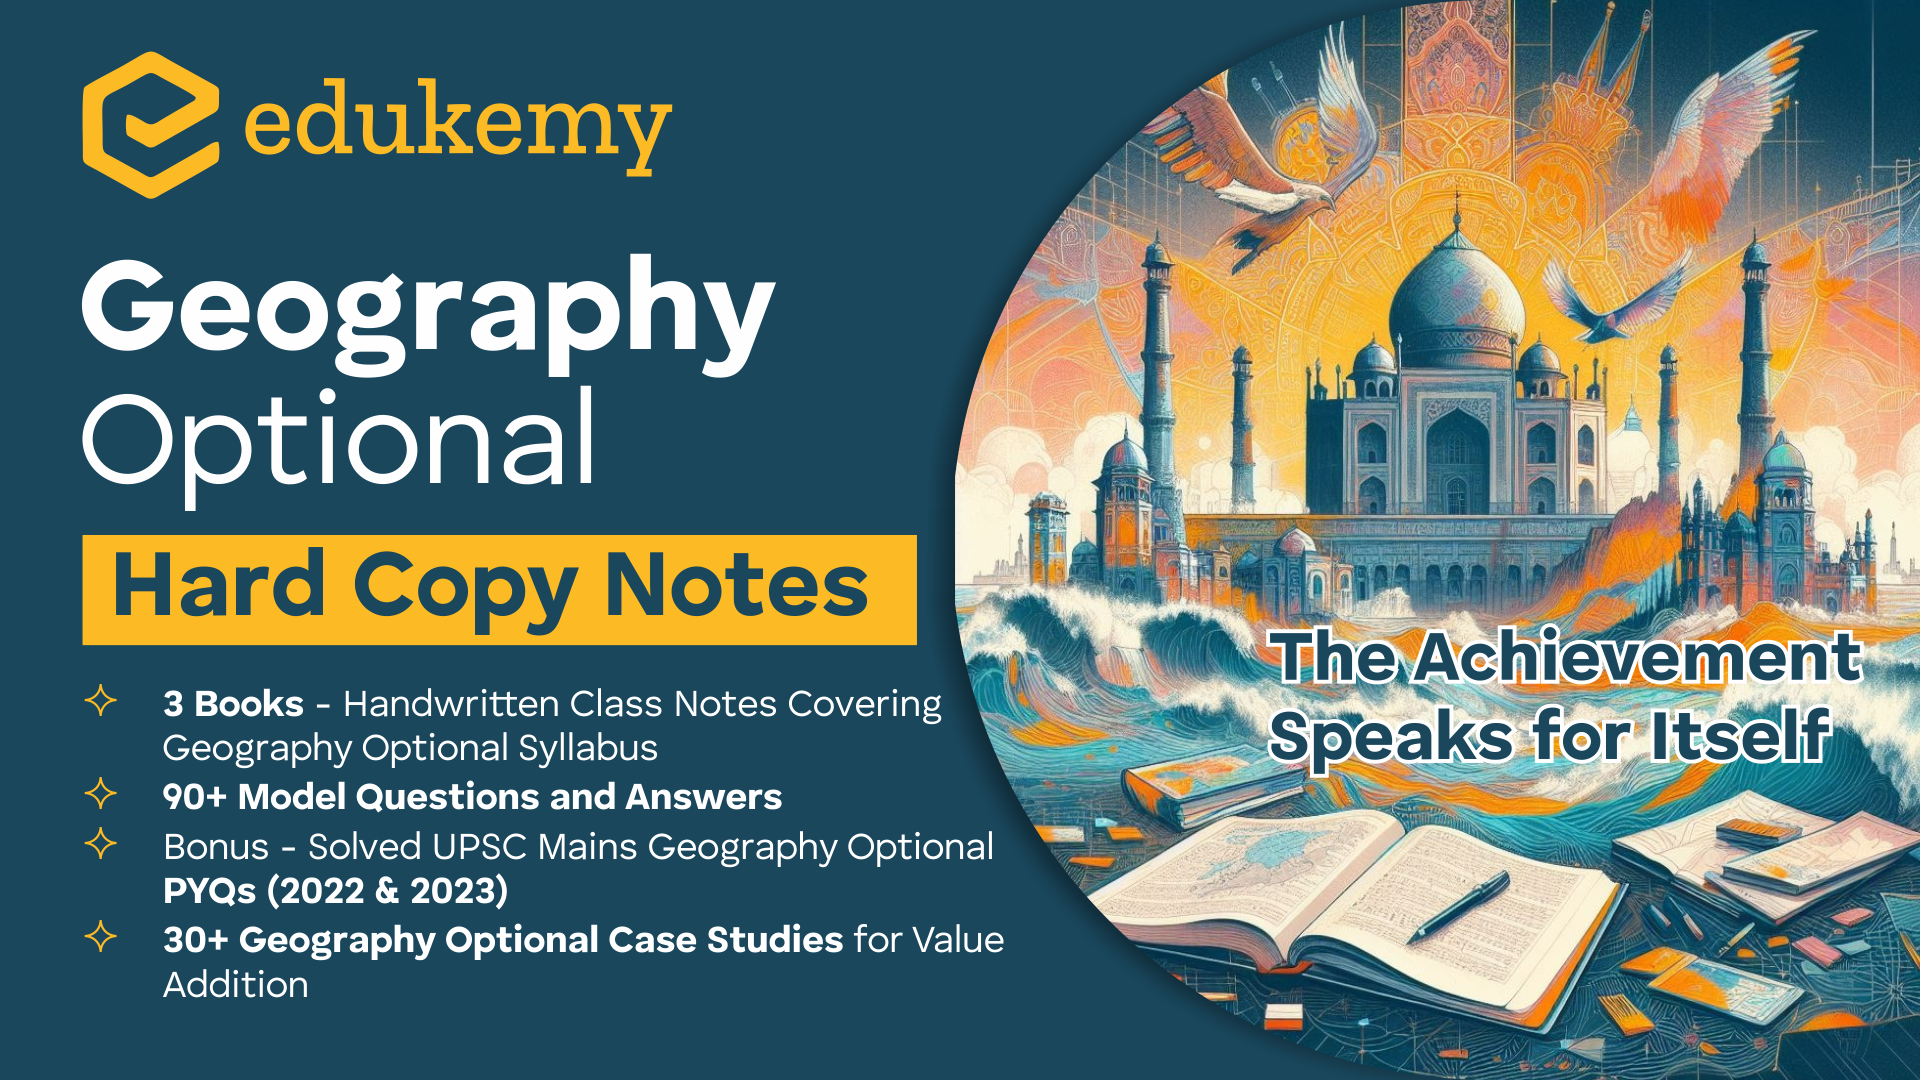 Geography Optional - Hard Copy Notes